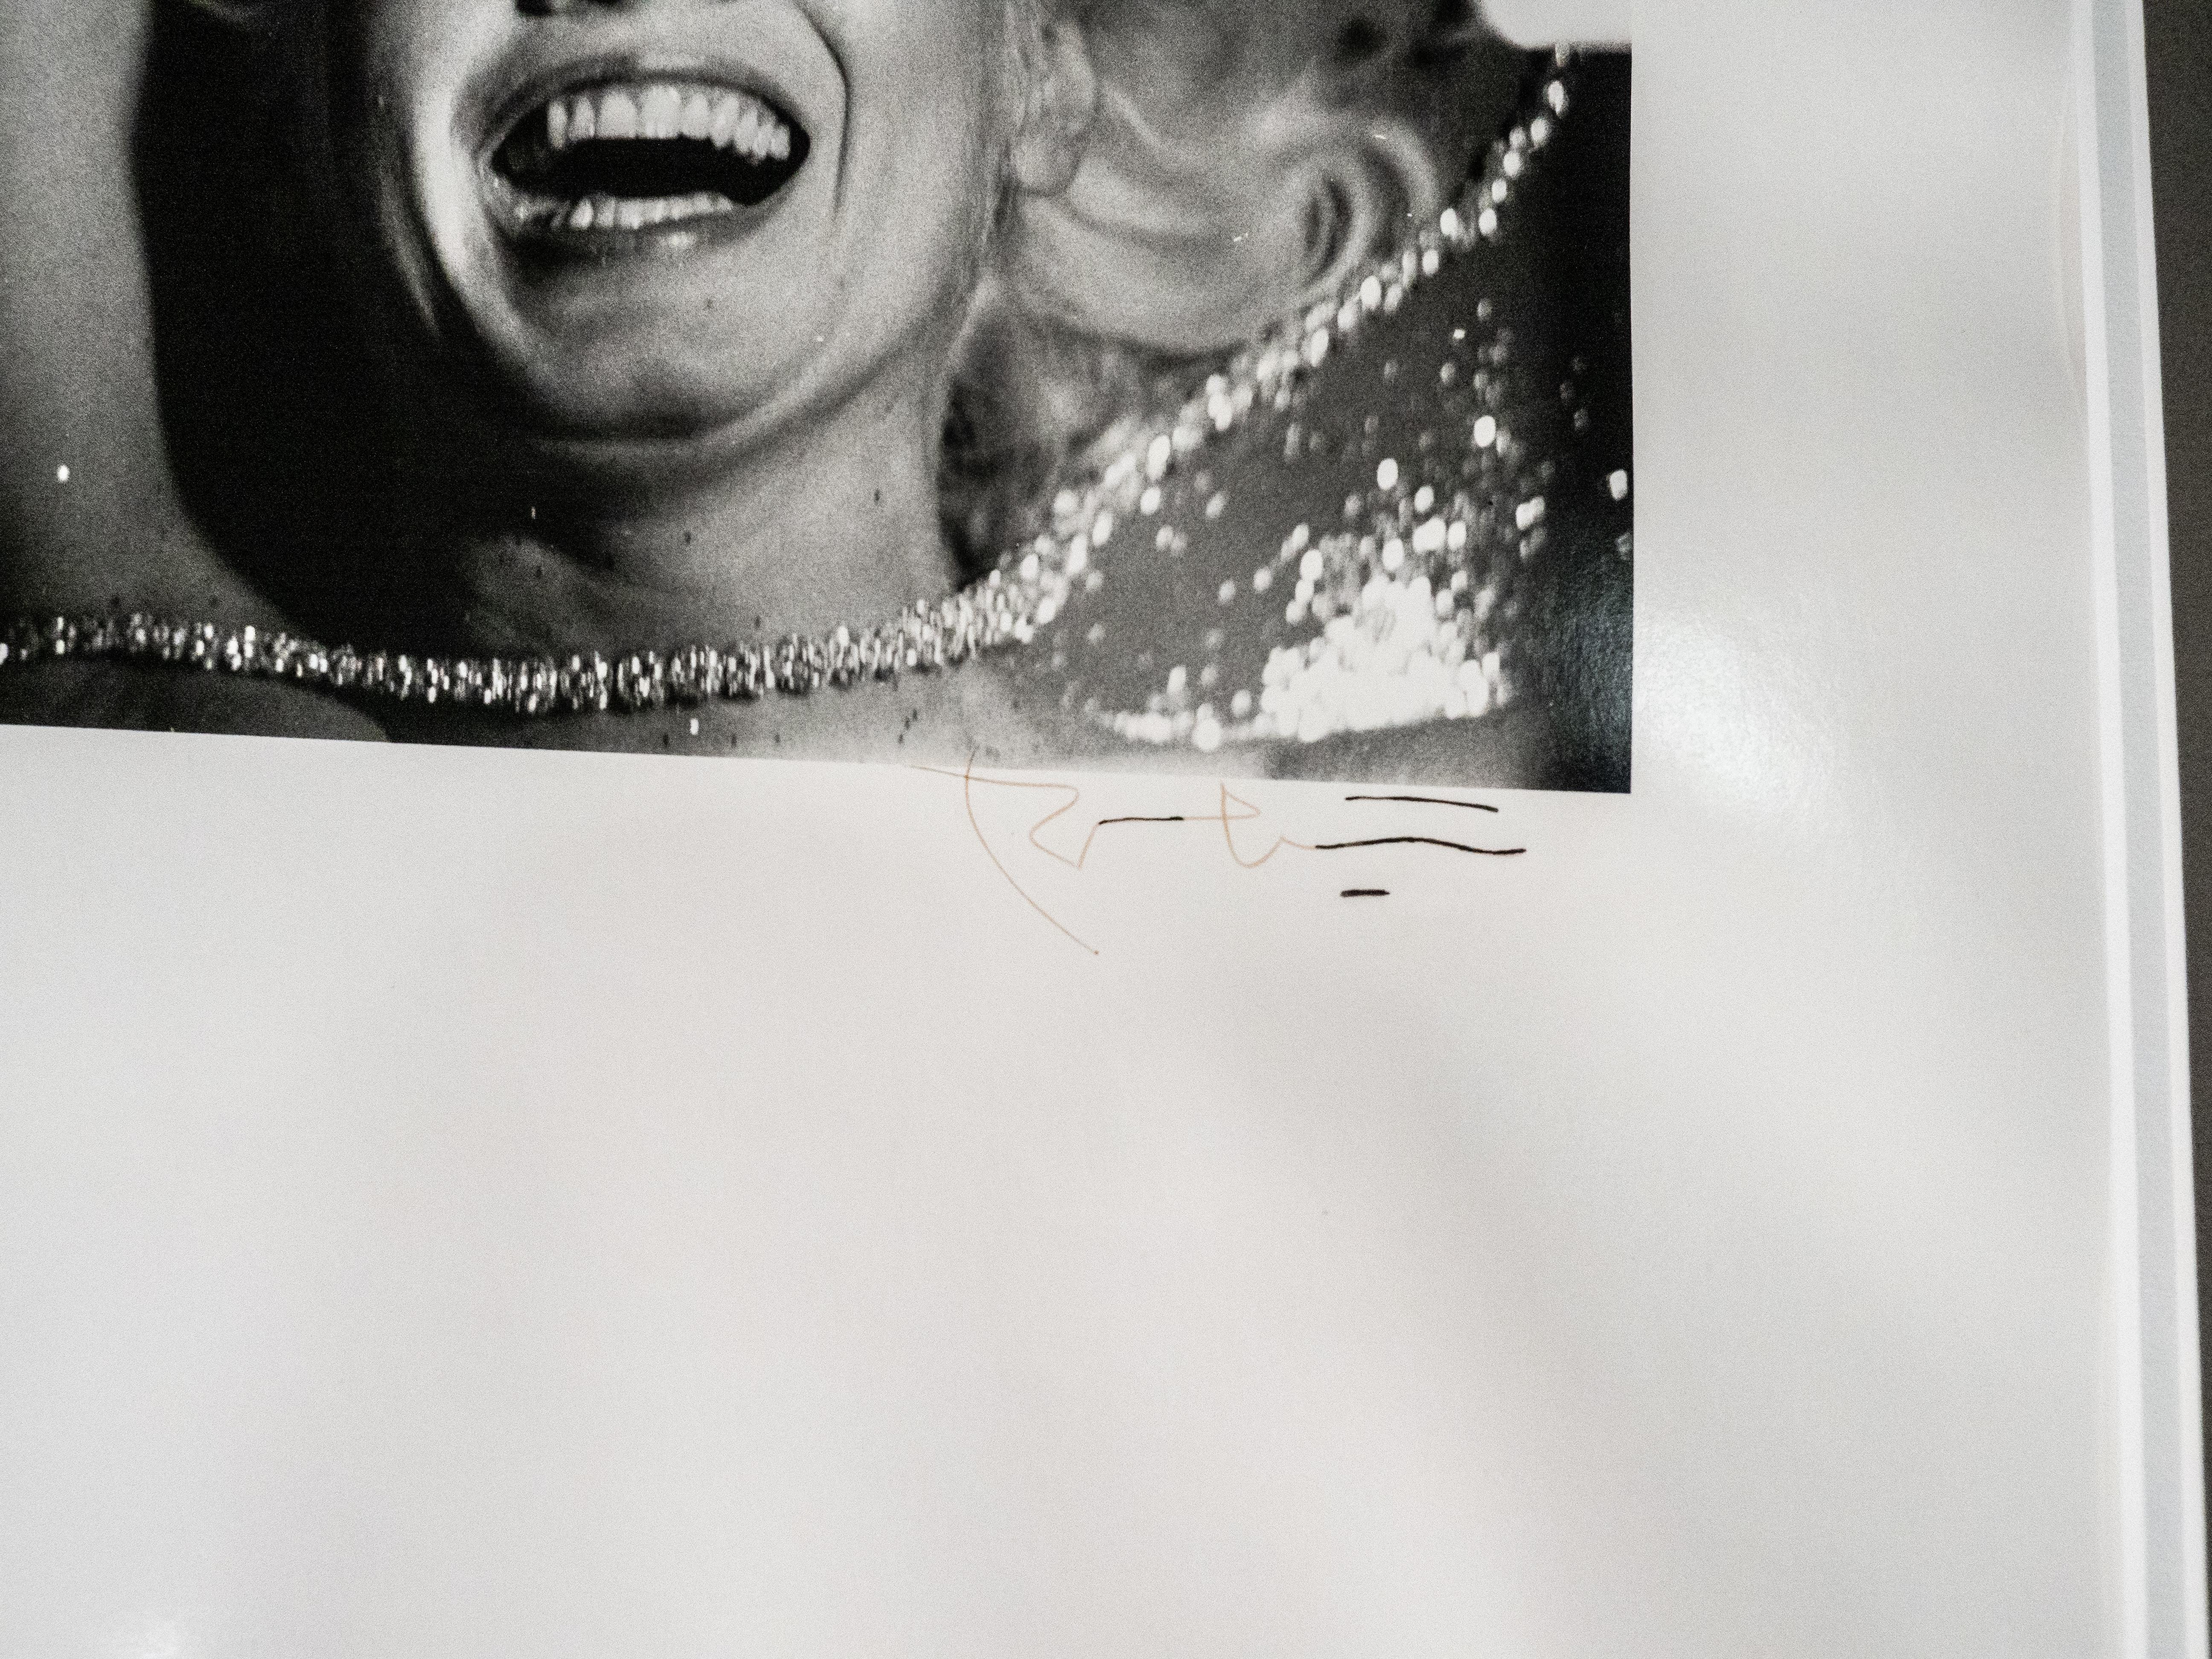 Sometimes referred to as Marilyn with Pearls or Marilyn Laughing into Camera.
Taken with 35mm hence the format, image size smaller. Printed on 16x20 paper. 
Signed on front in pen. Taken for Vogue 1962
